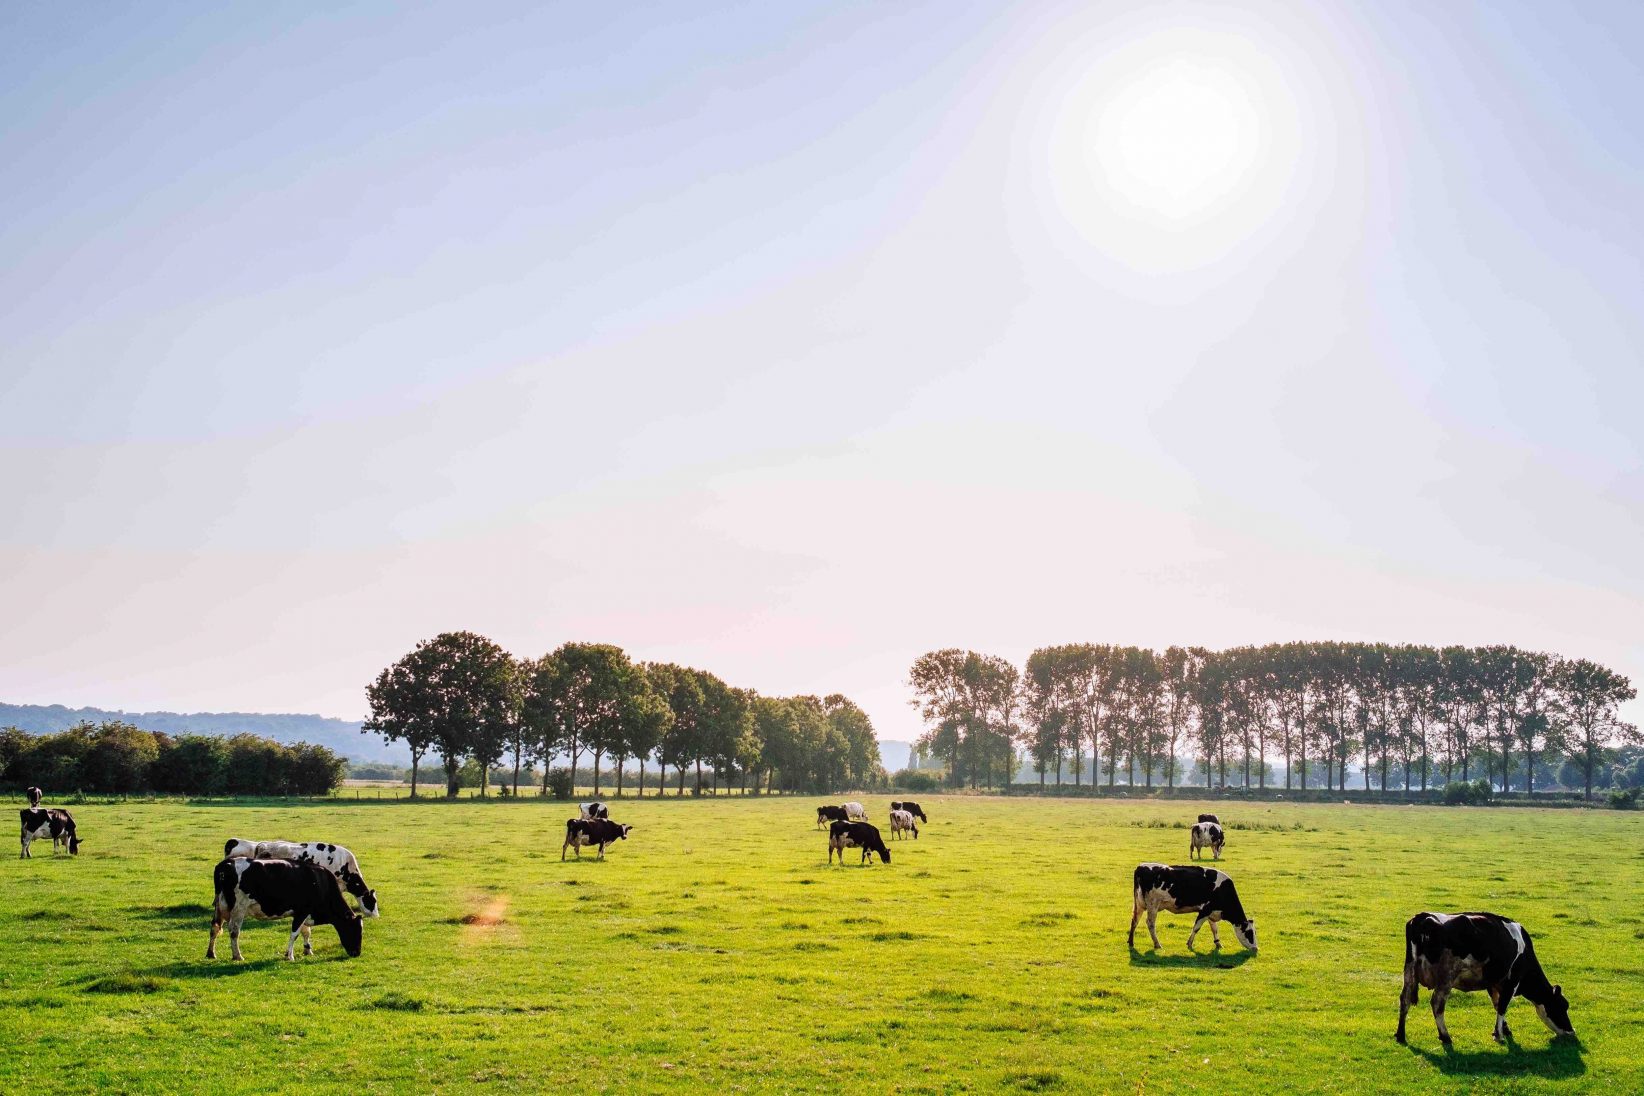 Why and how is Dairy Farmers of America working with startups?